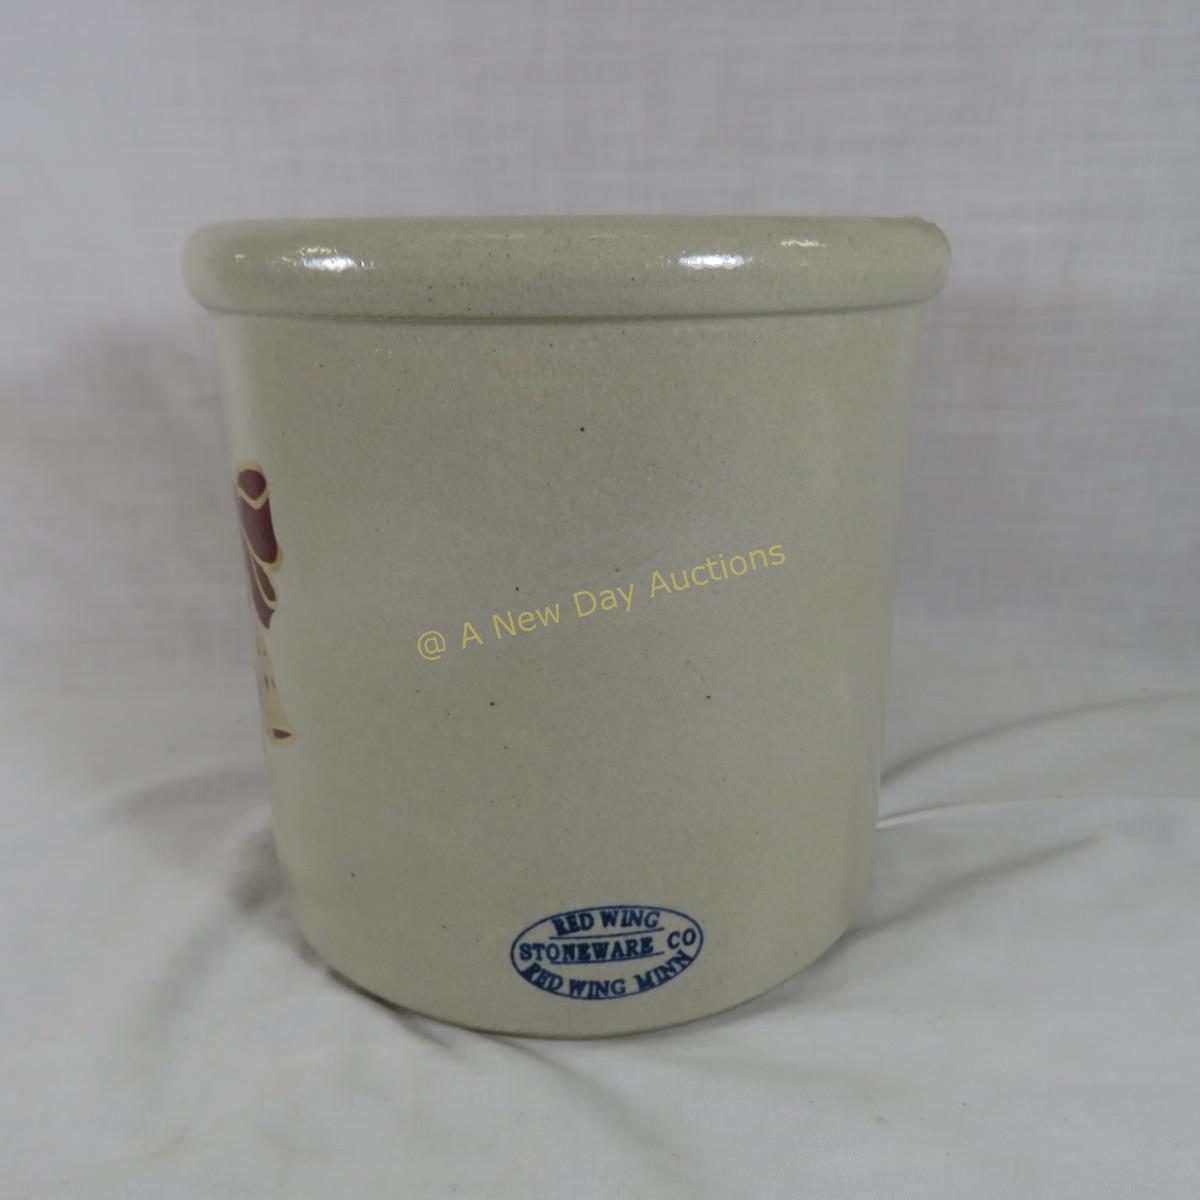 2001 McDonalds Holiday Greetings Red Wing crock